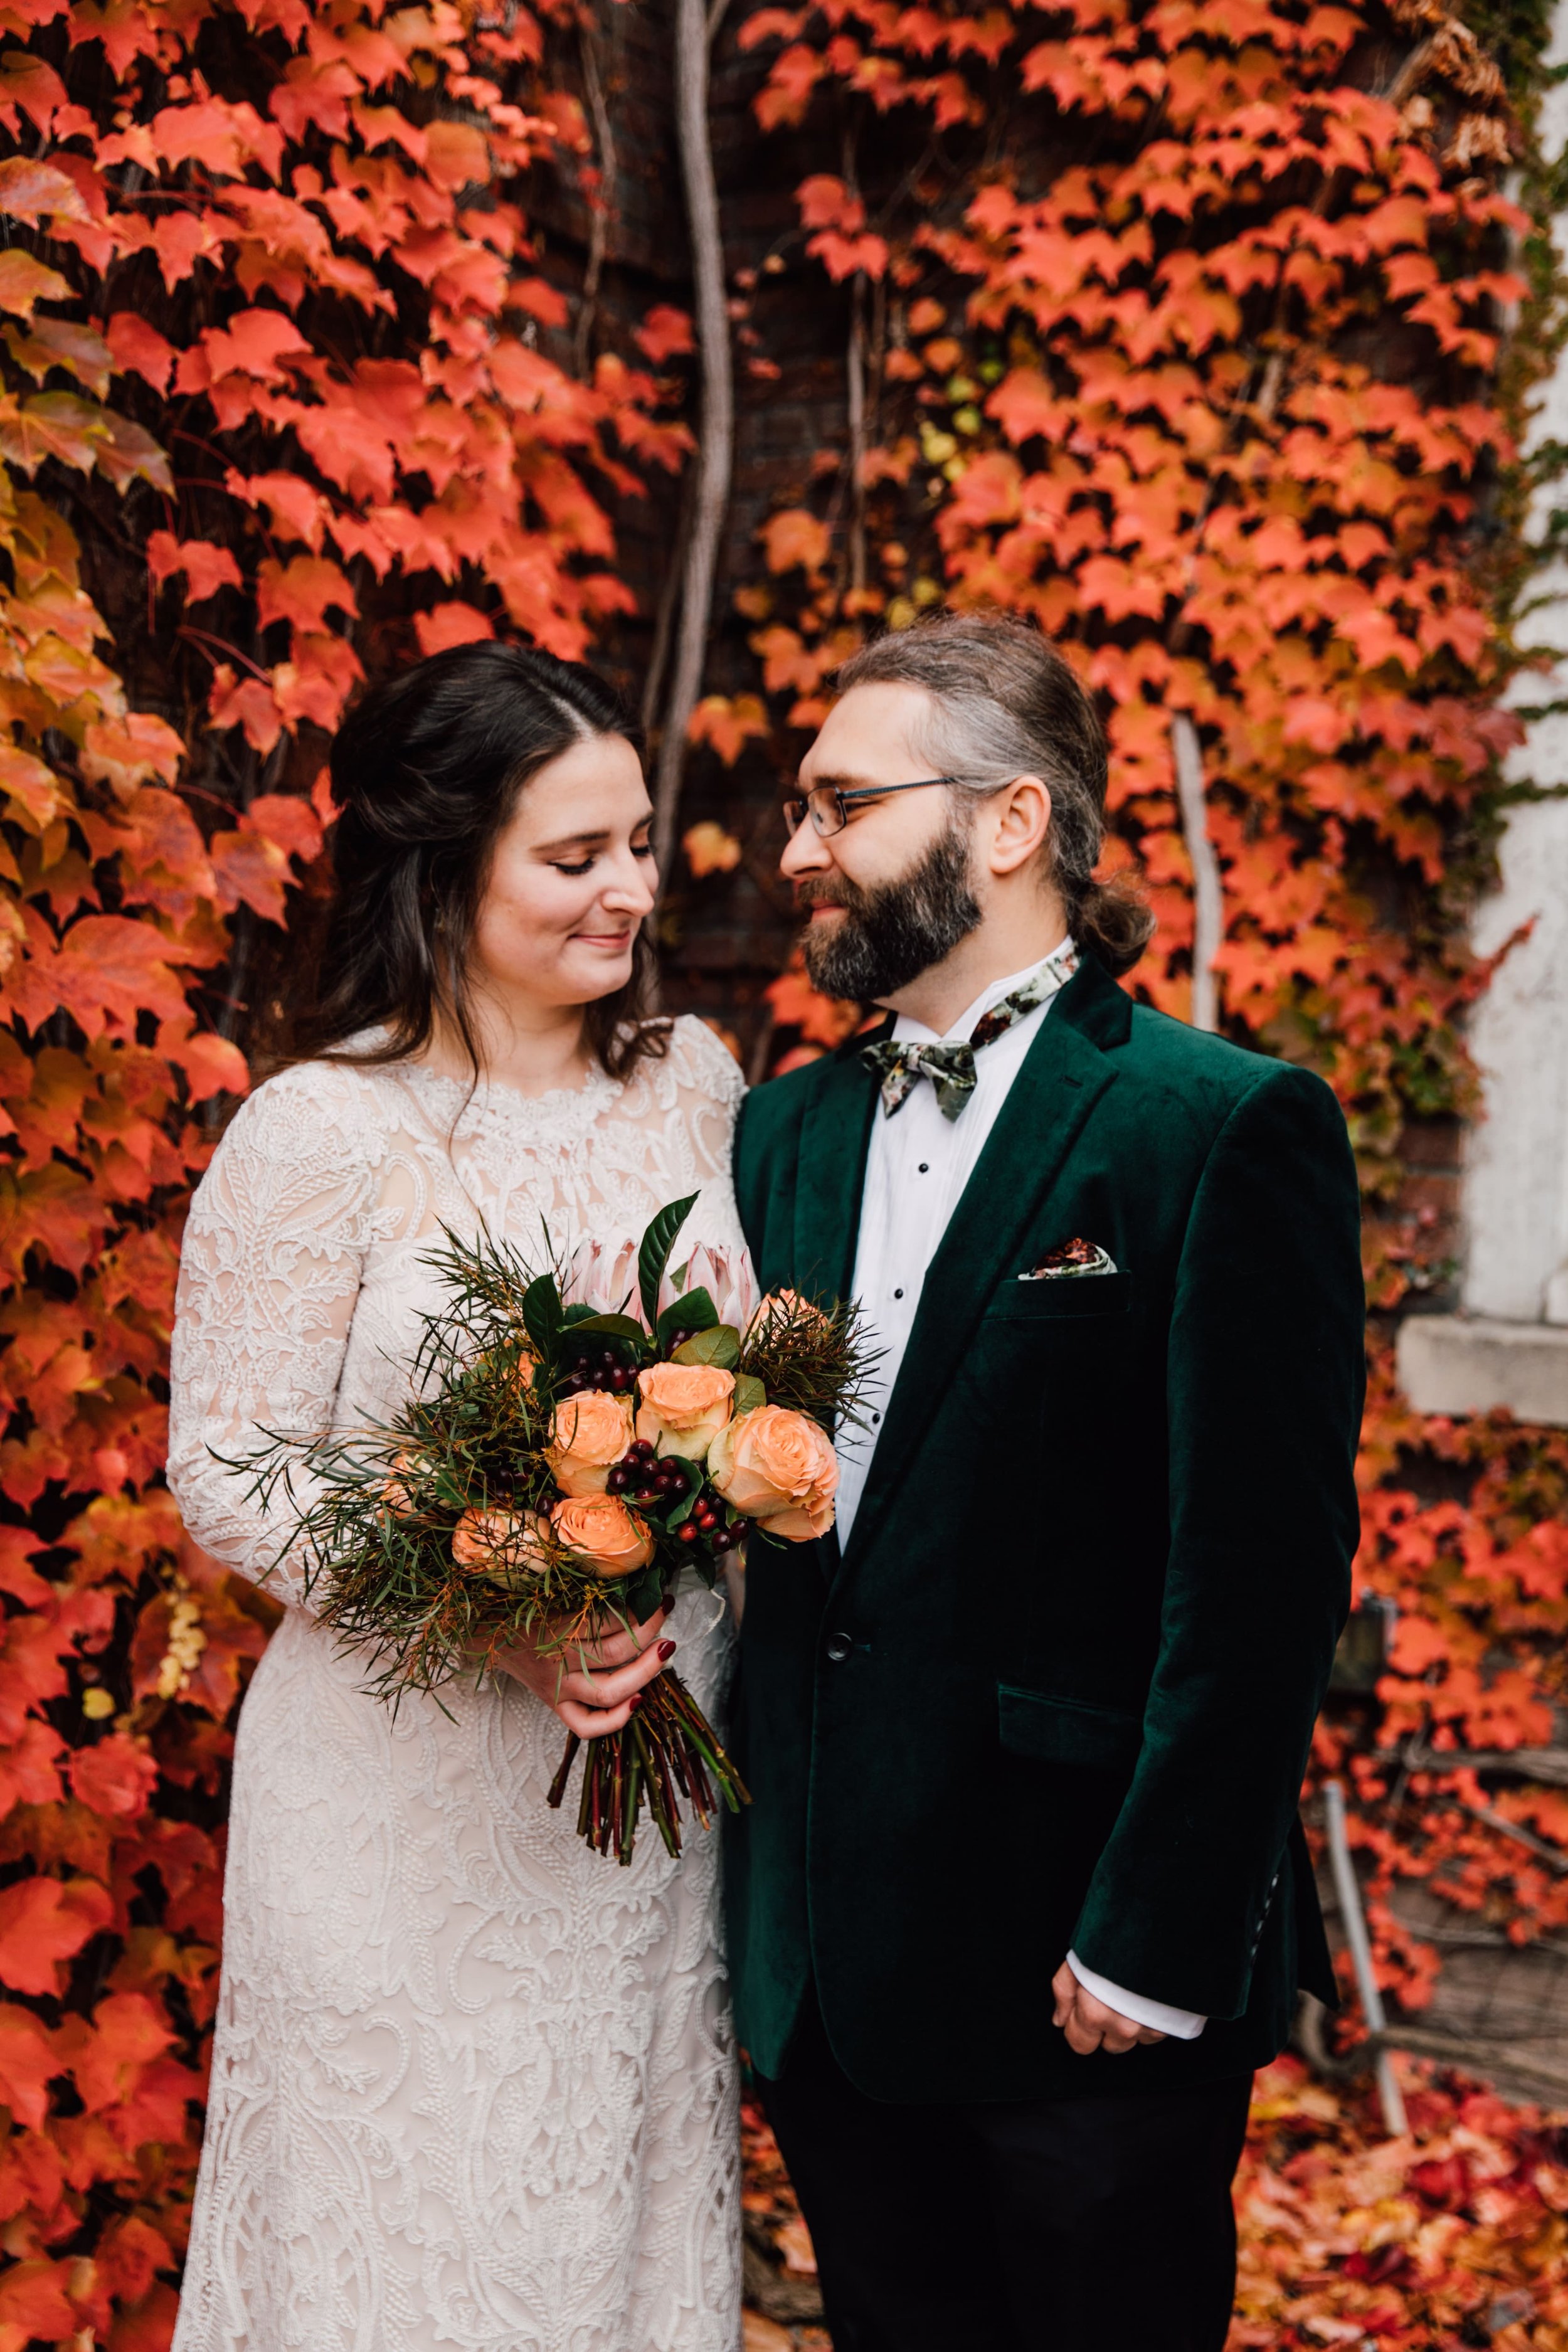  the bride and groom smile sweetly as they lean into each other and stand in front of fall orange ivy during wedding portrait session with syracuse ny wedding photographer 